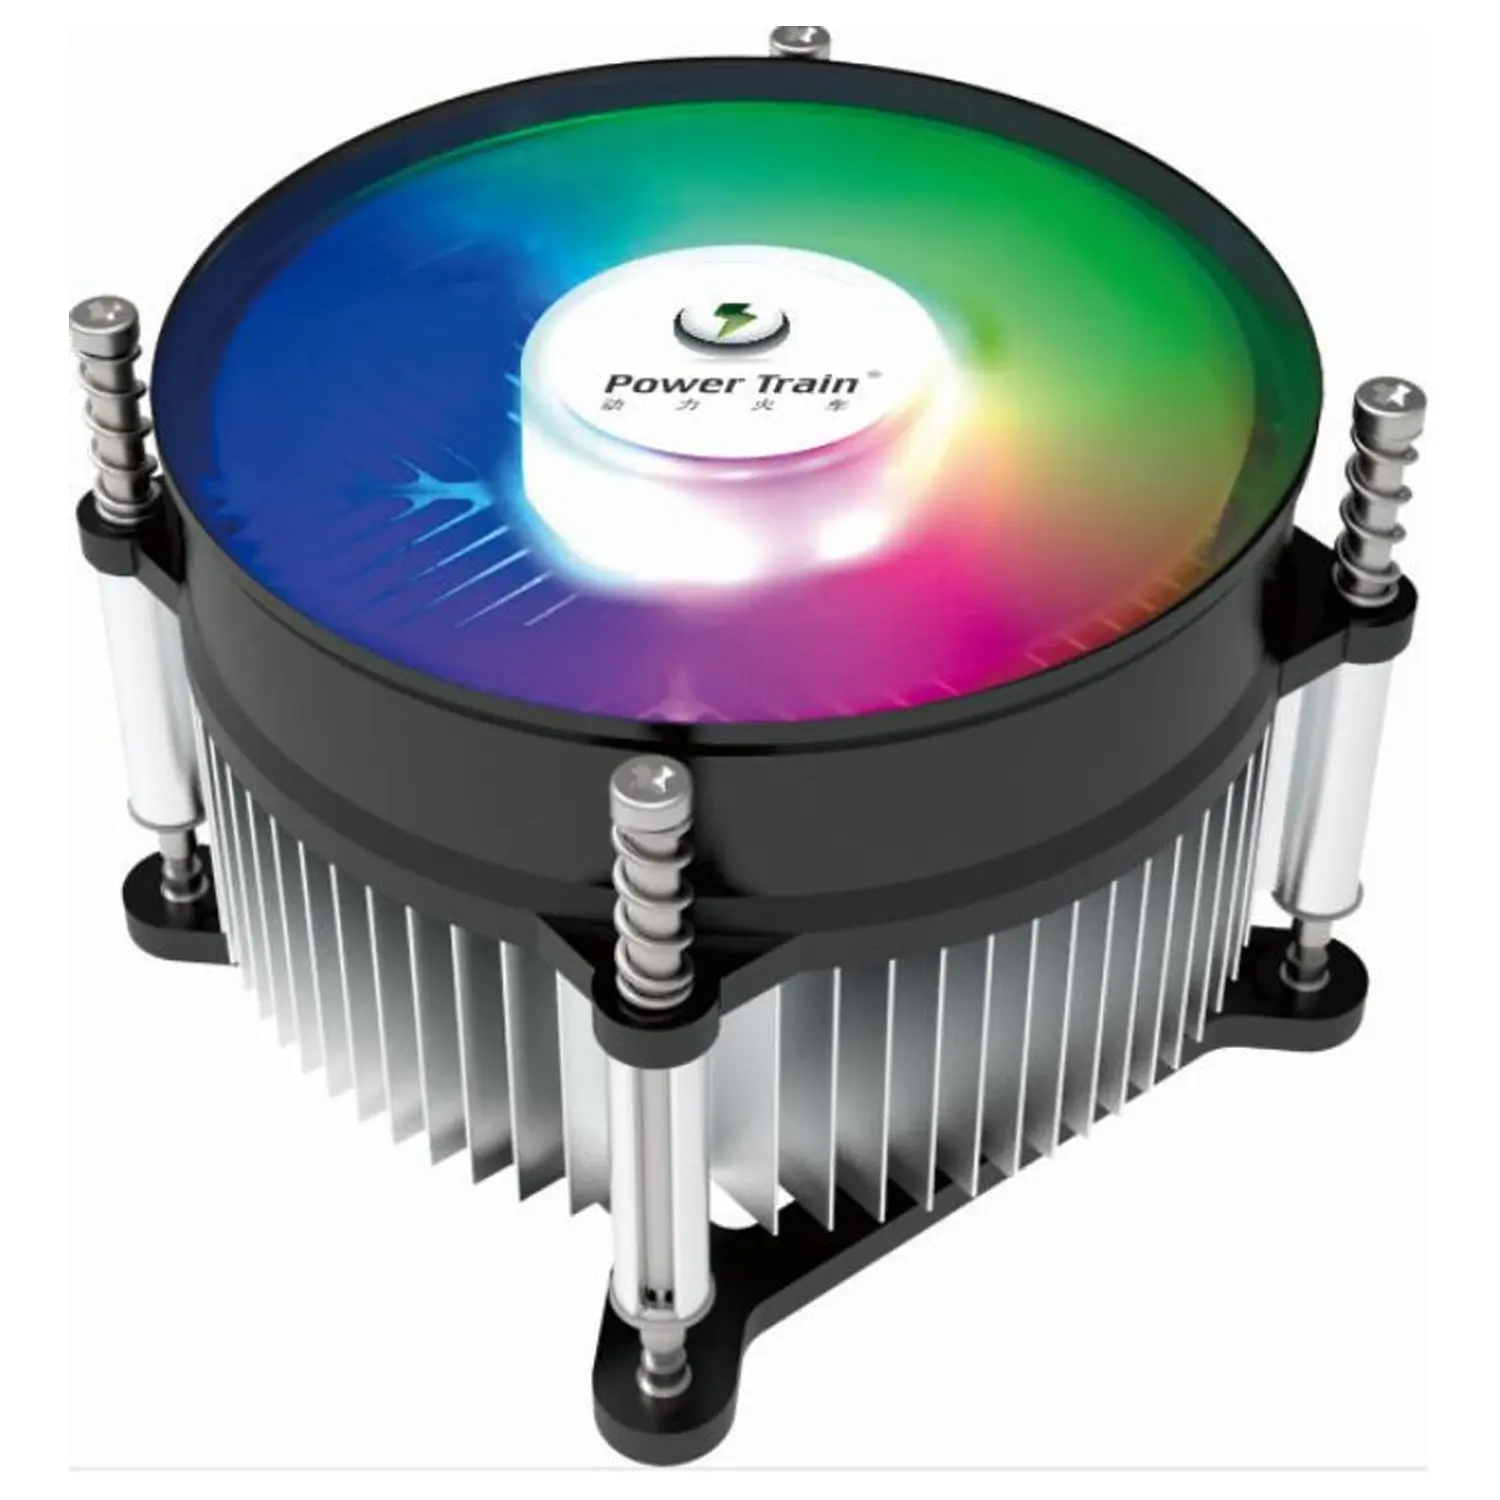 High Quality PC Computer Colorful Cooler CPU Cooler Fan For Intel